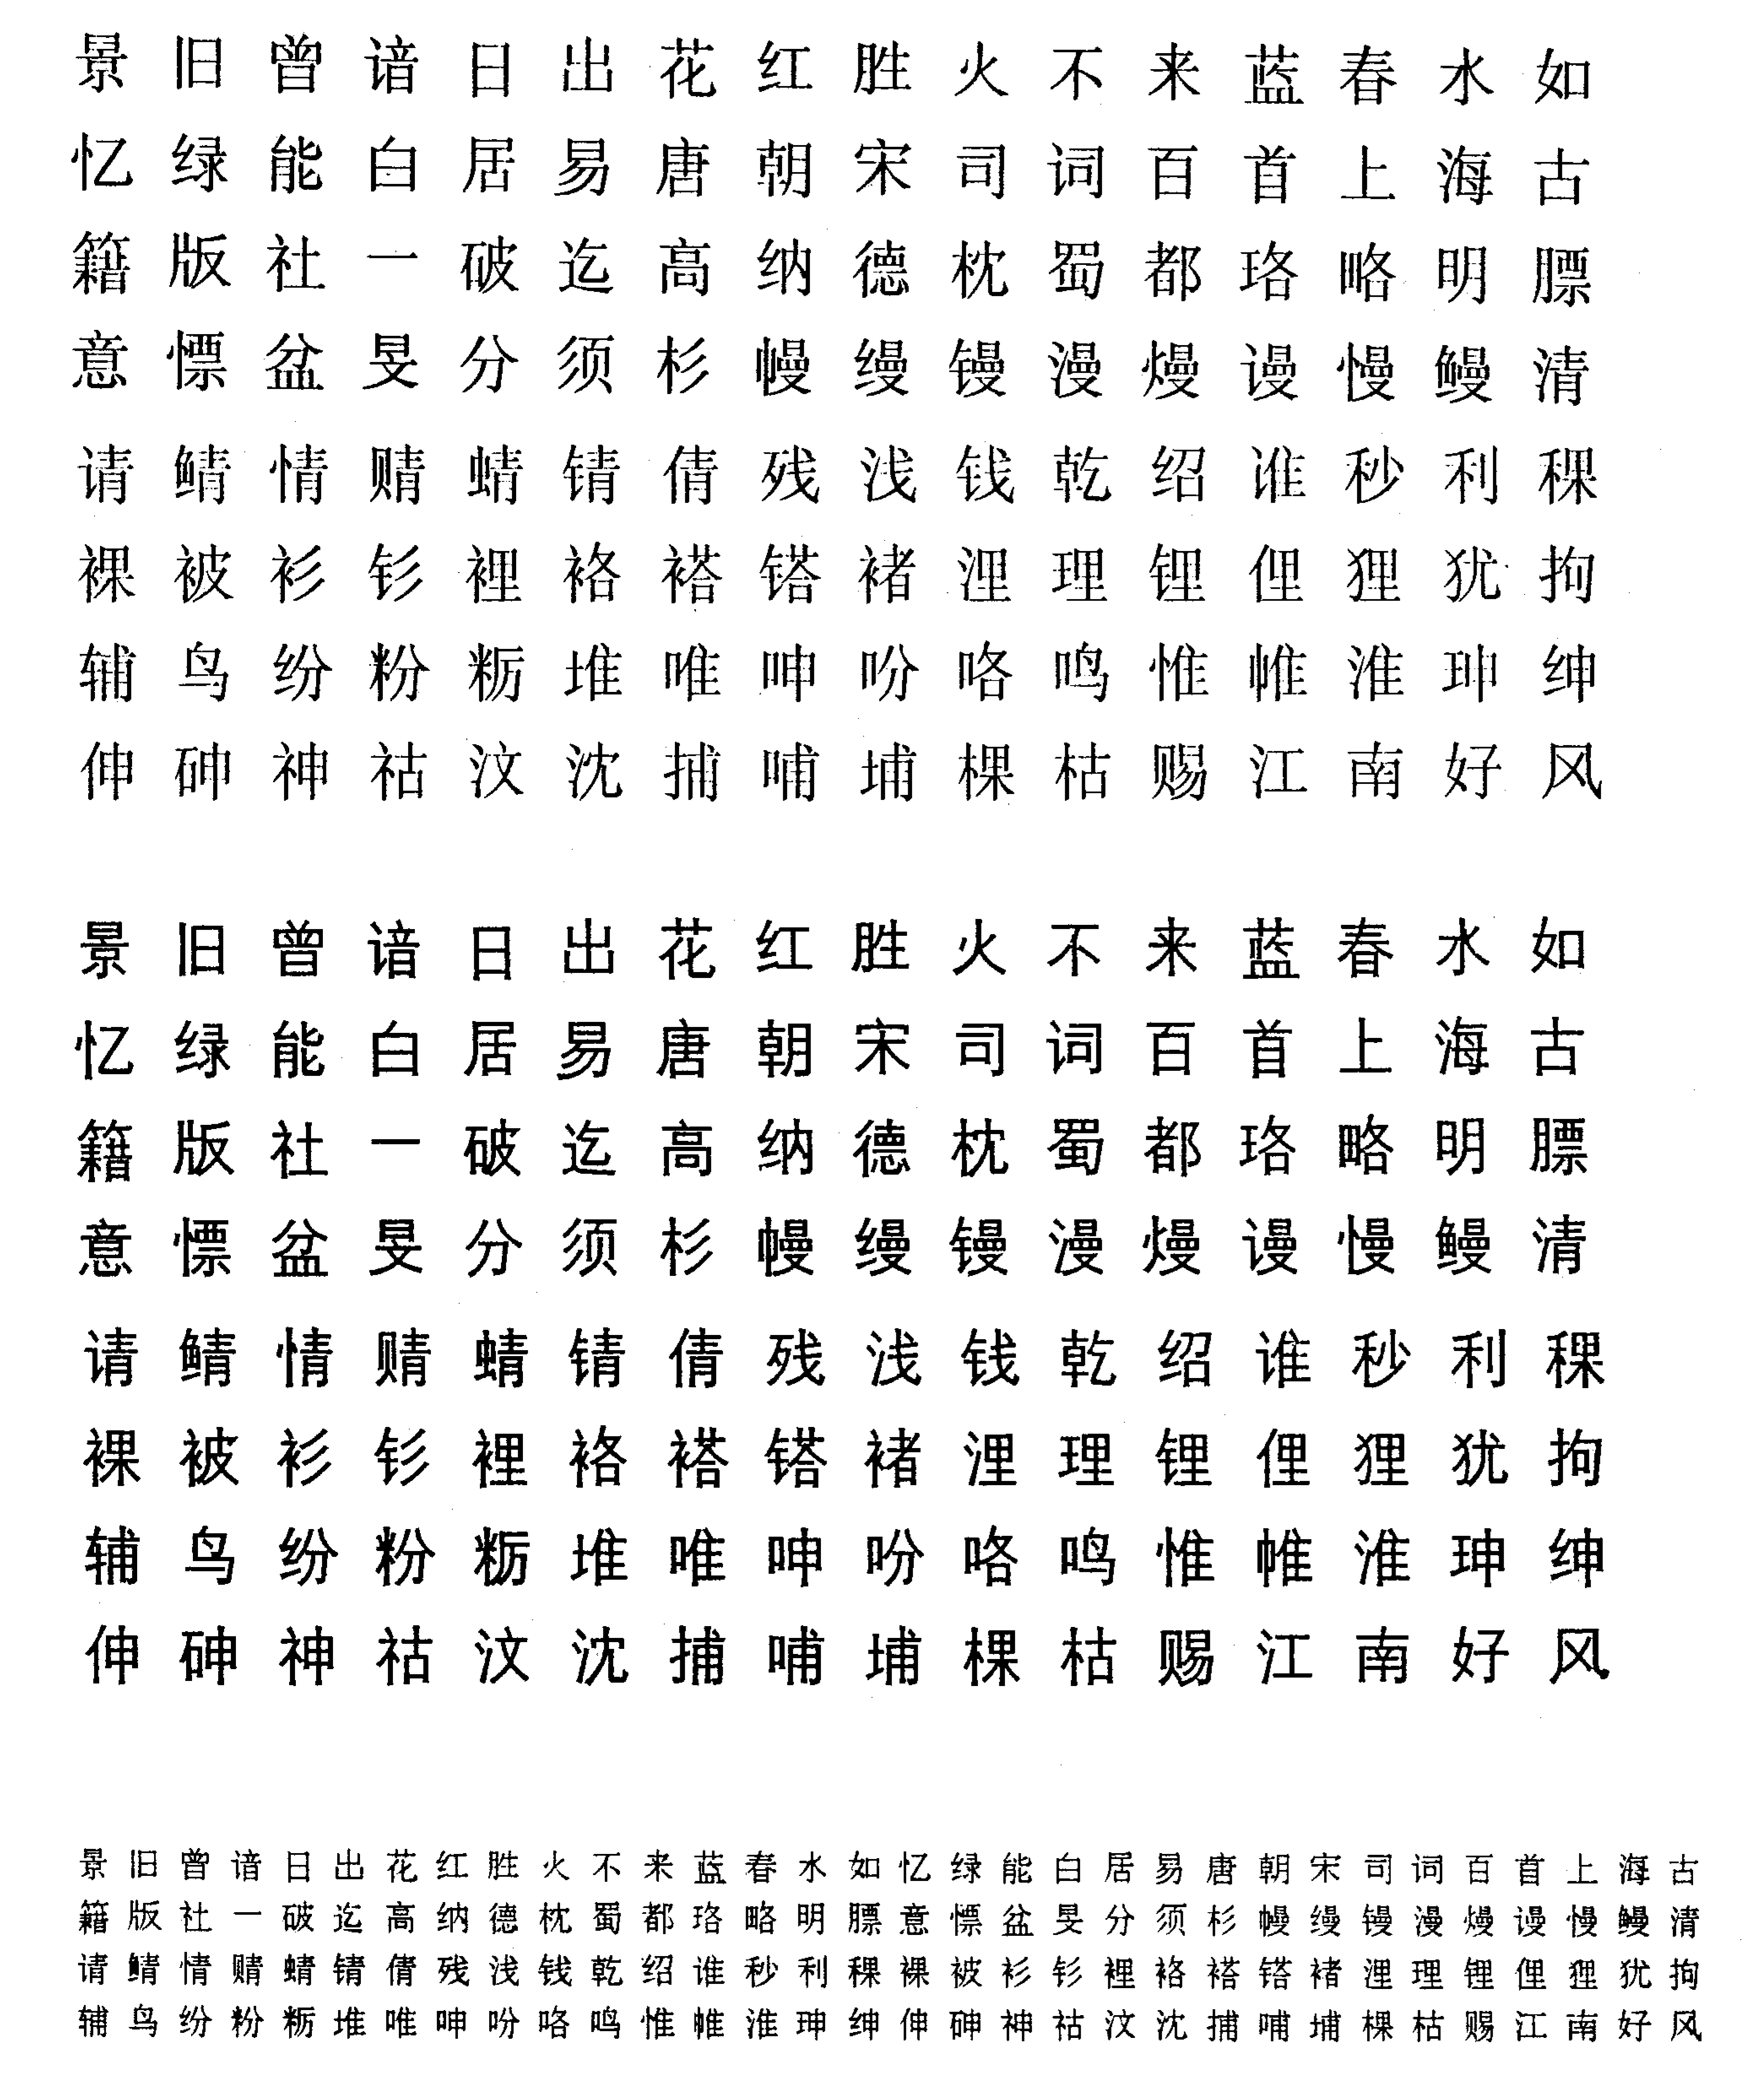 Specimen of a Chinese font produced by John Hobby and Guoan Gu using Metafont.